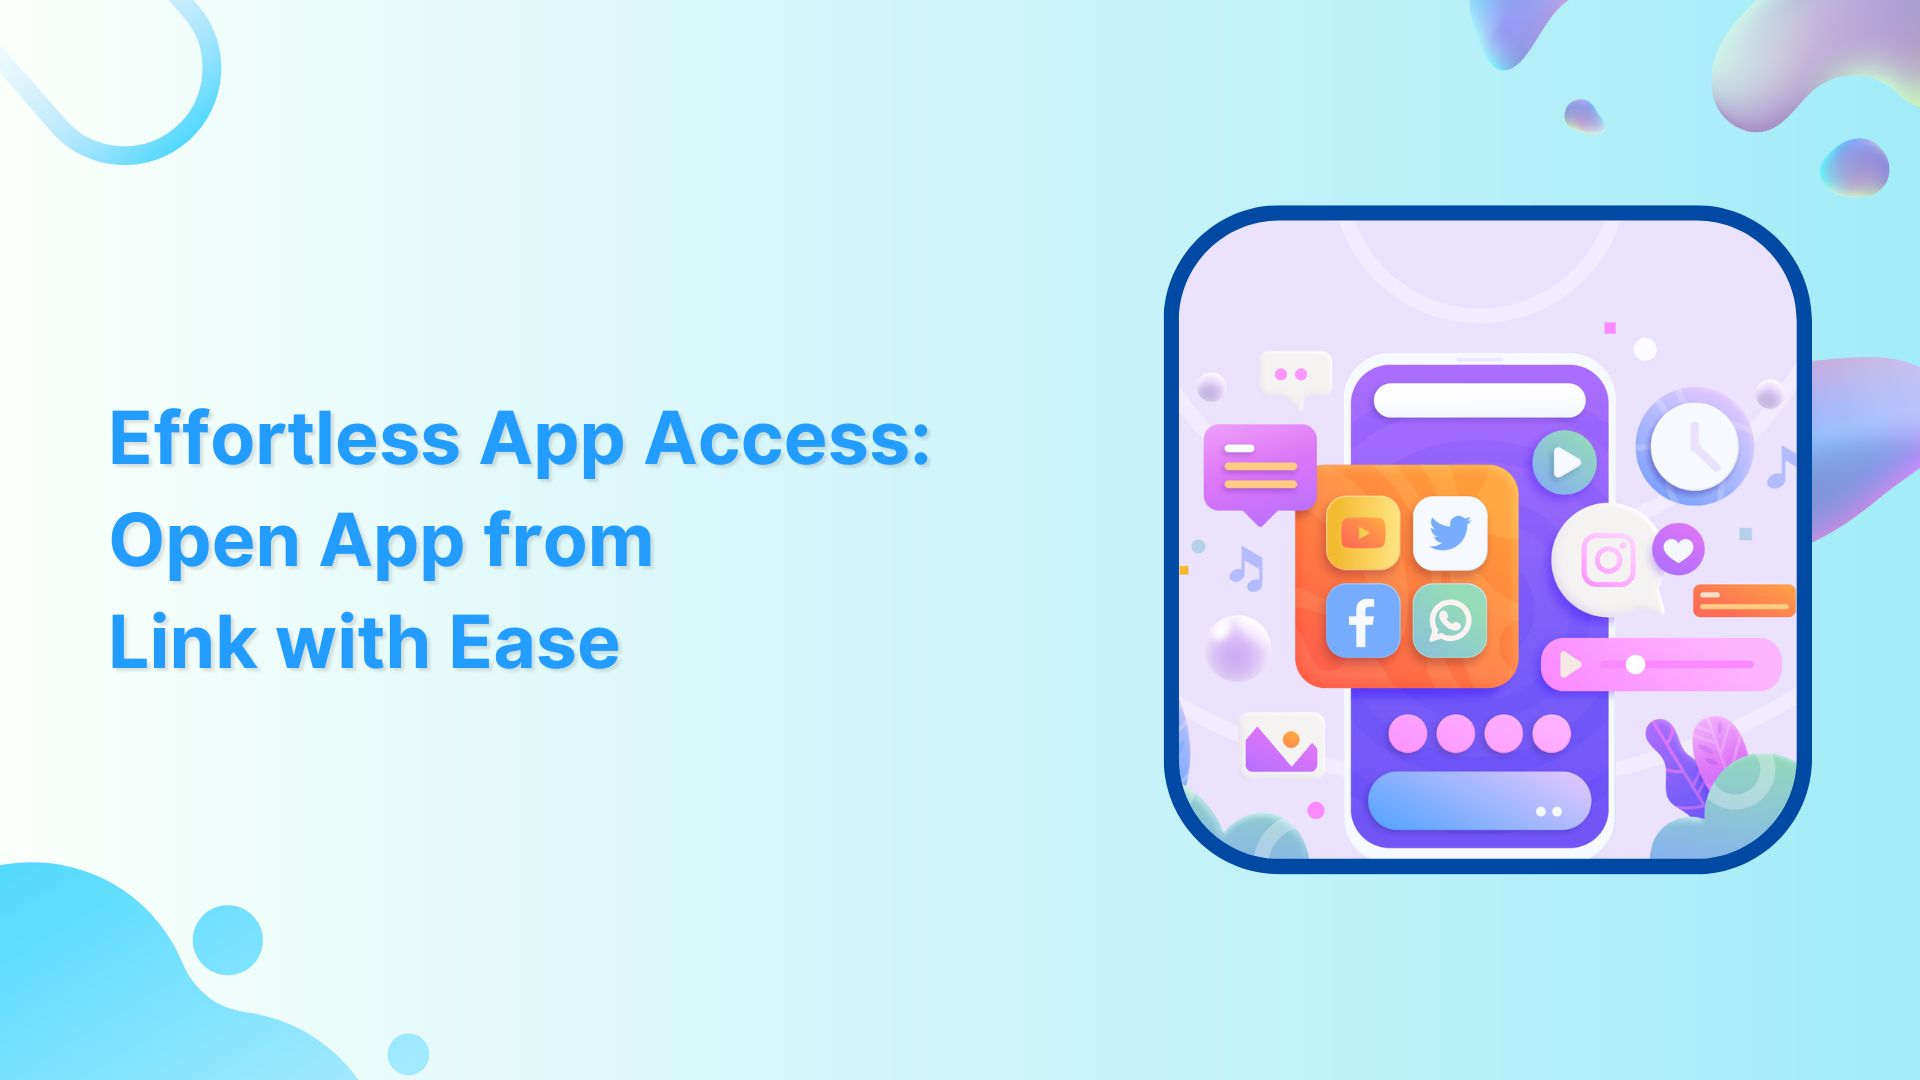 Effortless App Access: How to Open App from Link with Ease?